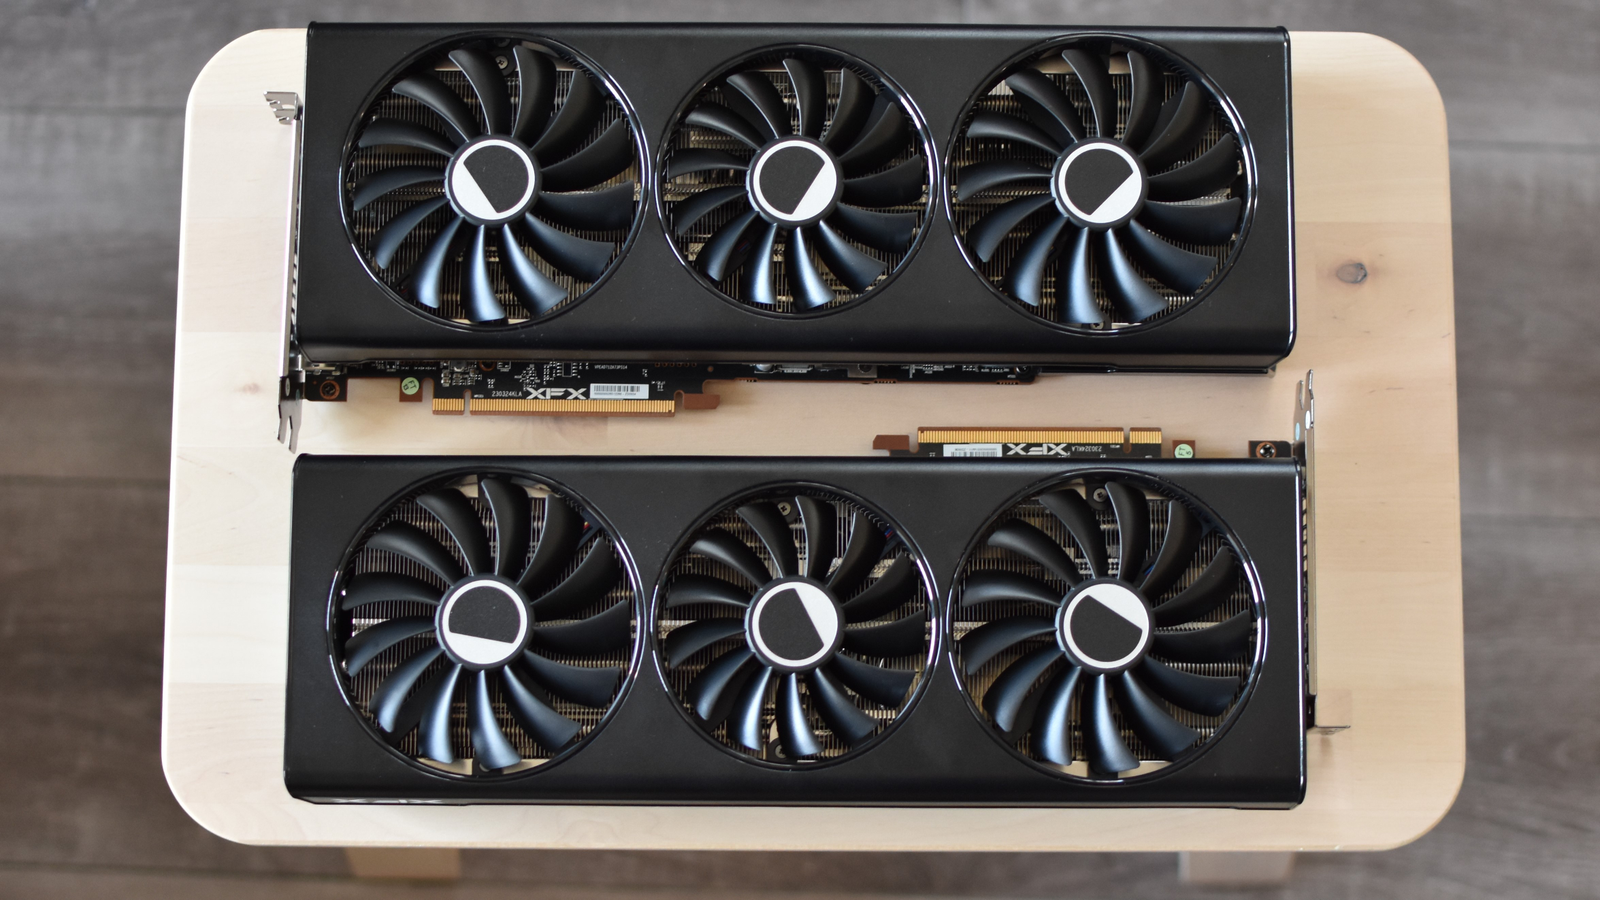 AMD announces Radeon RX 7800 XT and 7700 XT graphics cards